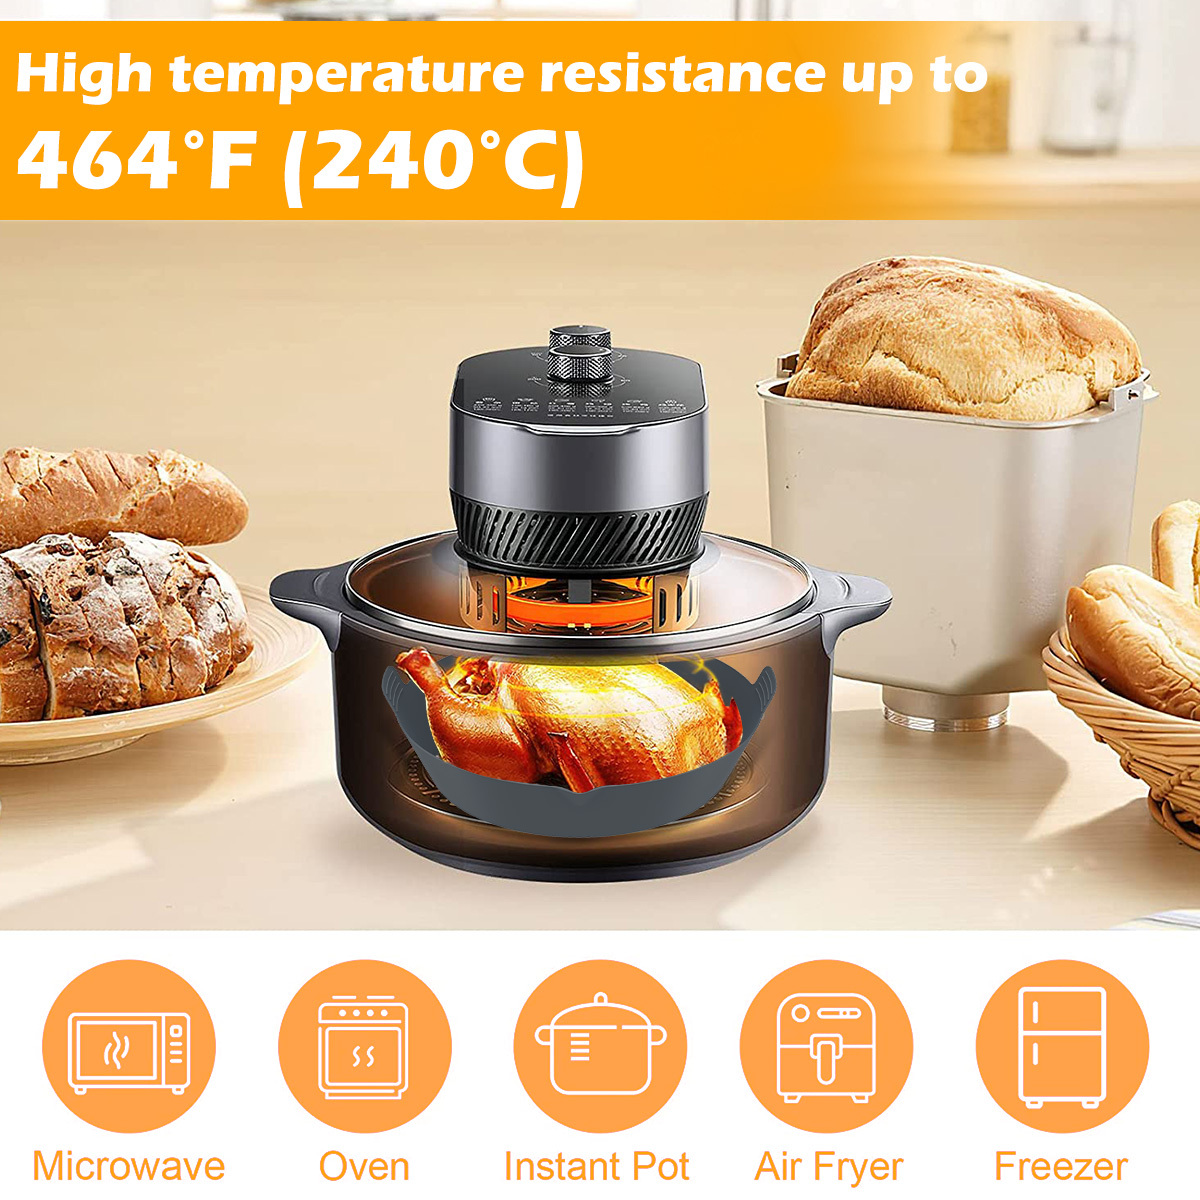 2Pcs Air Fryer Silicone Pot with Handle Reusable Air Fryer Liner